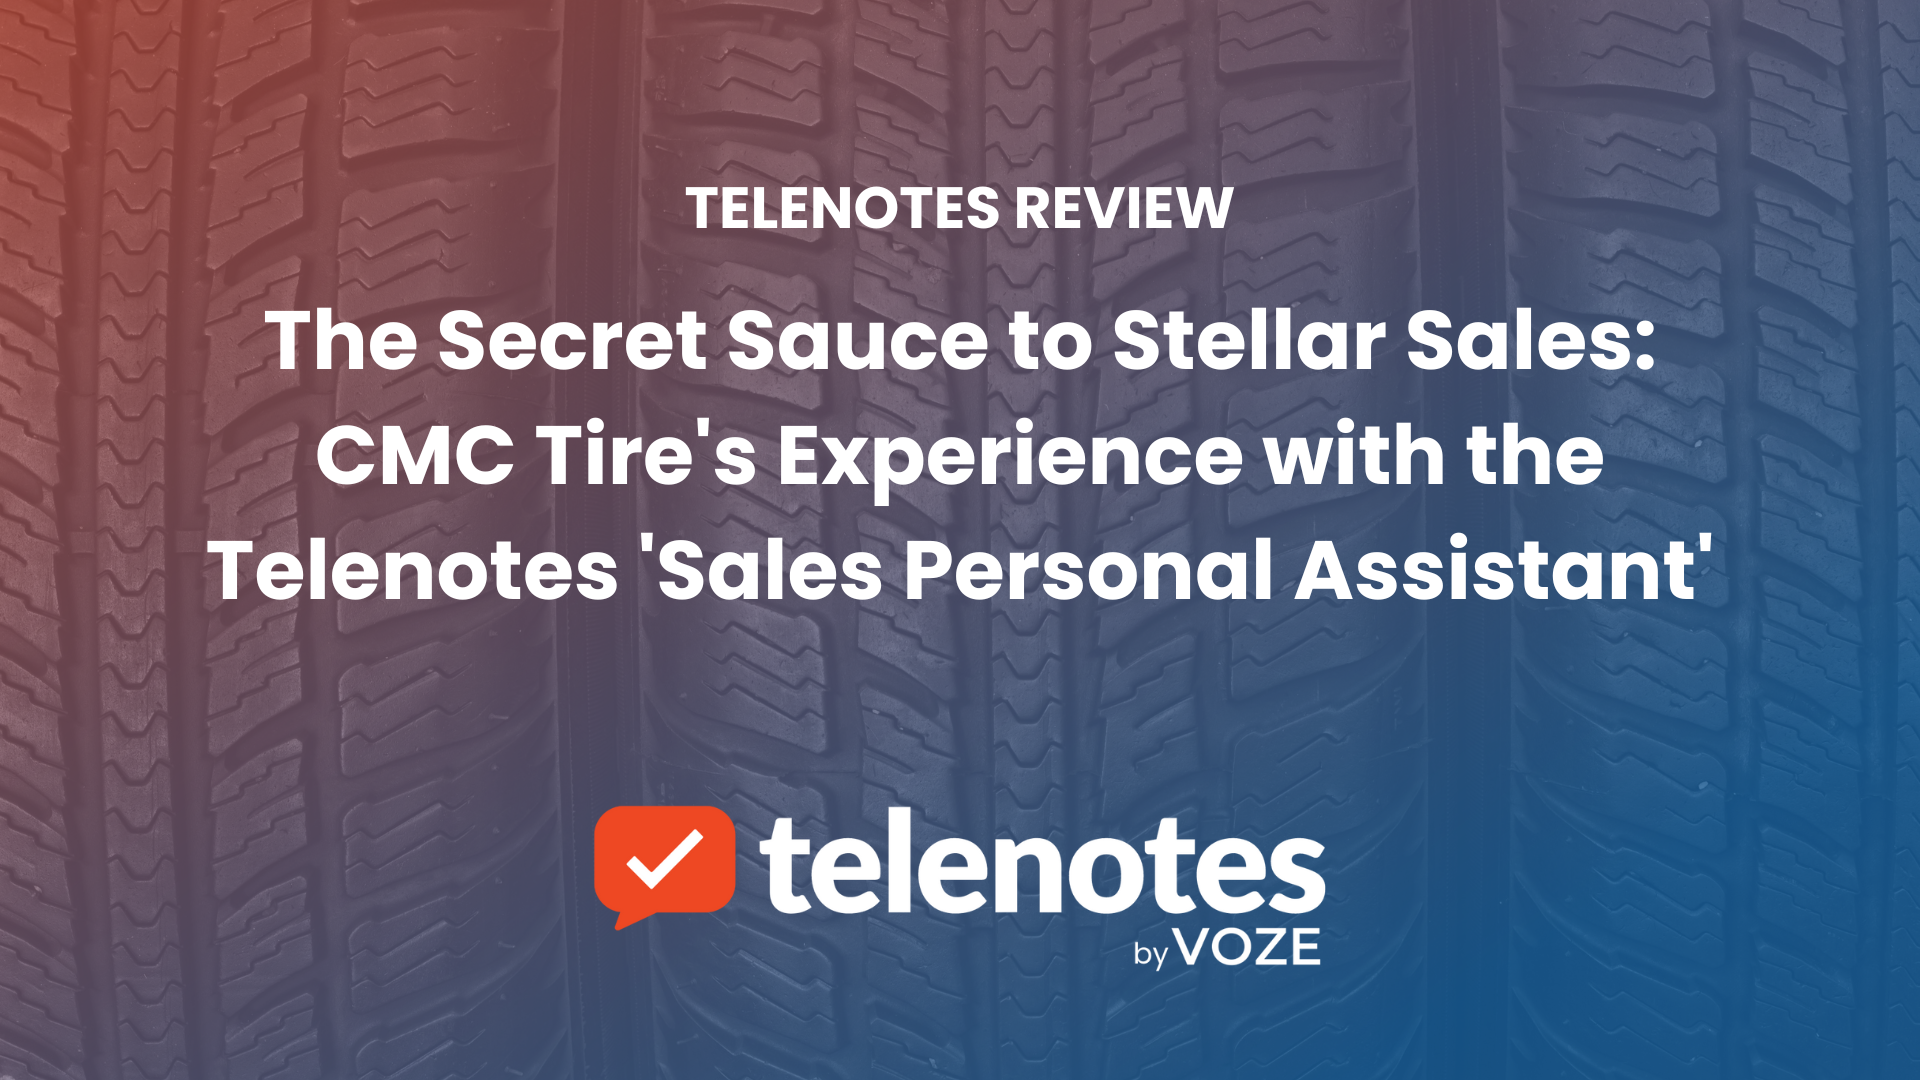 The Secret Sauce to Stellar Sales: CMC Tire’s Experience with the Telenotes ‘Sales Personal Assistant’